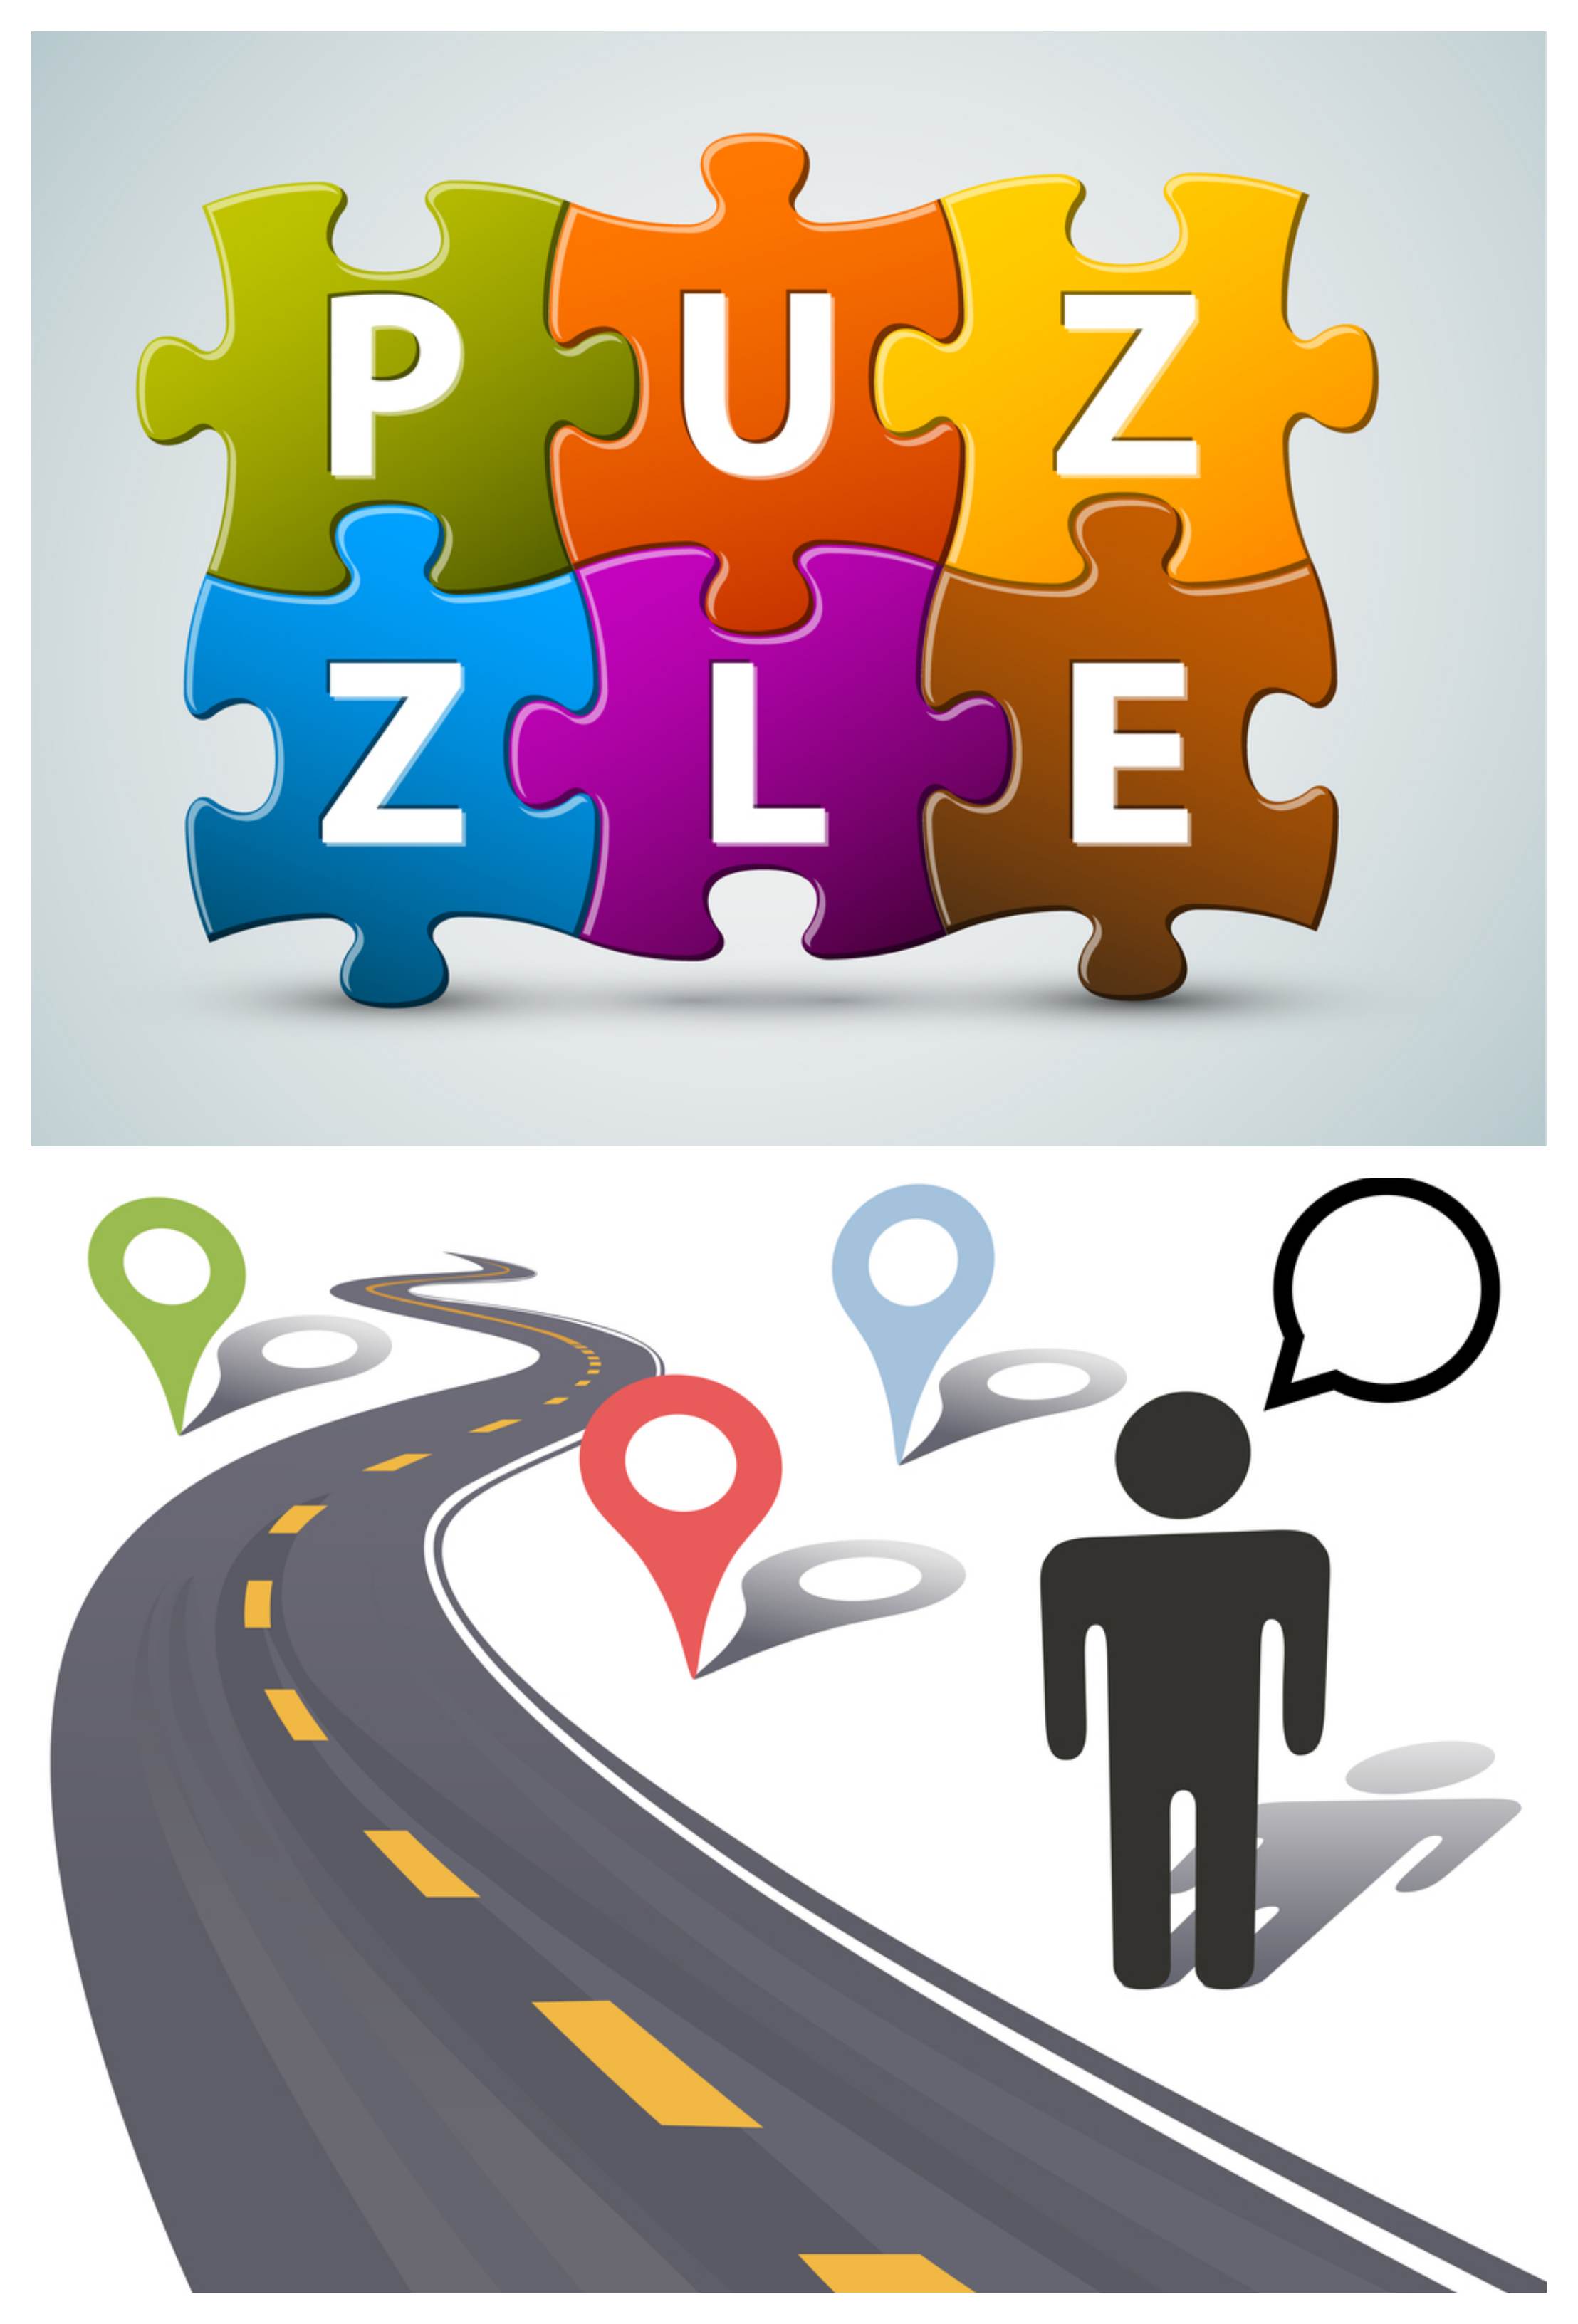 Puzzle and Navigation